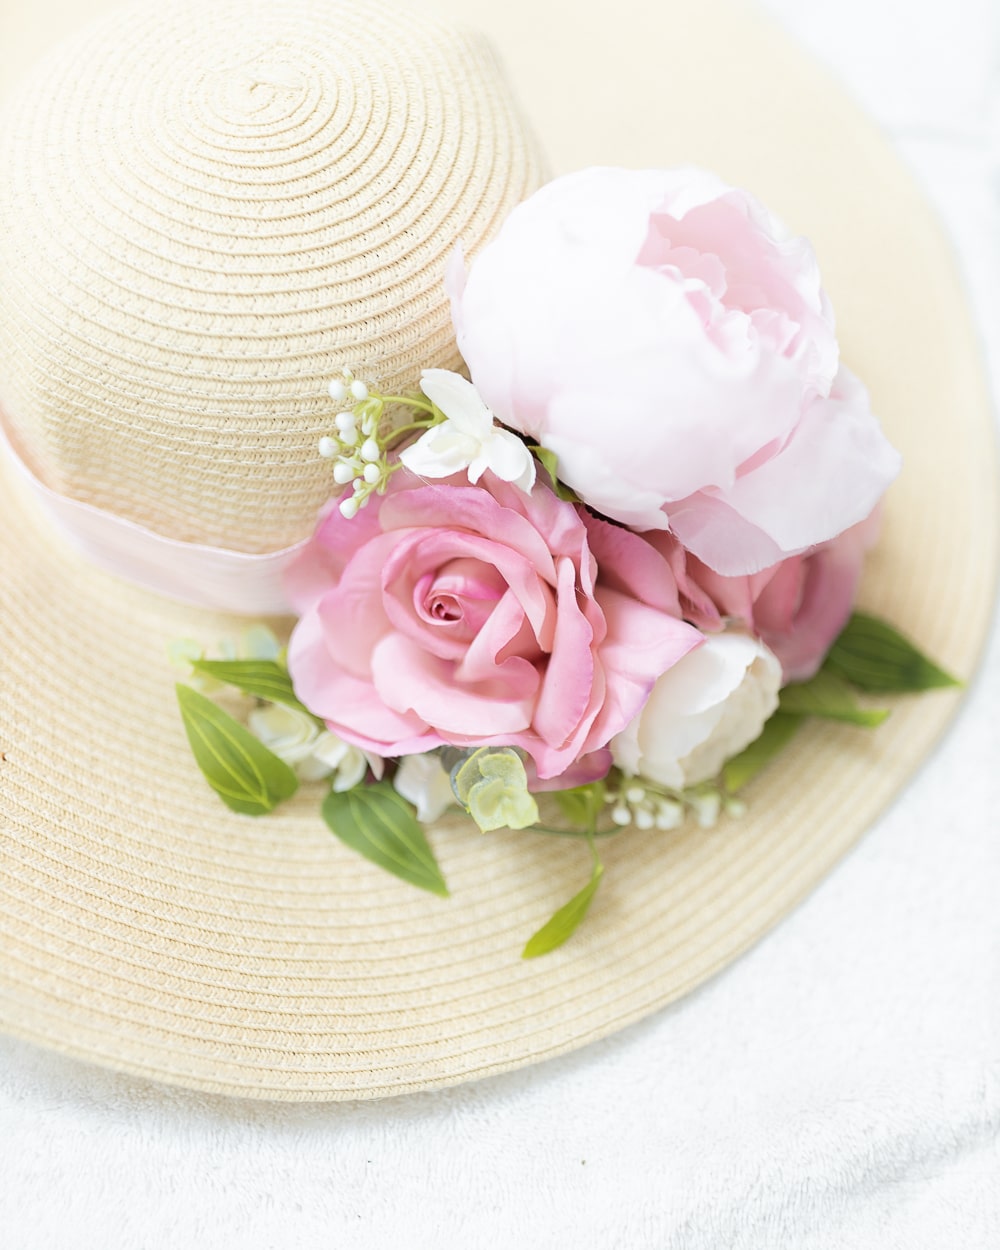 DIY Kentucky Derby hat ideas from southern blogger Stephanie Ziajka on Diary of a Debutante